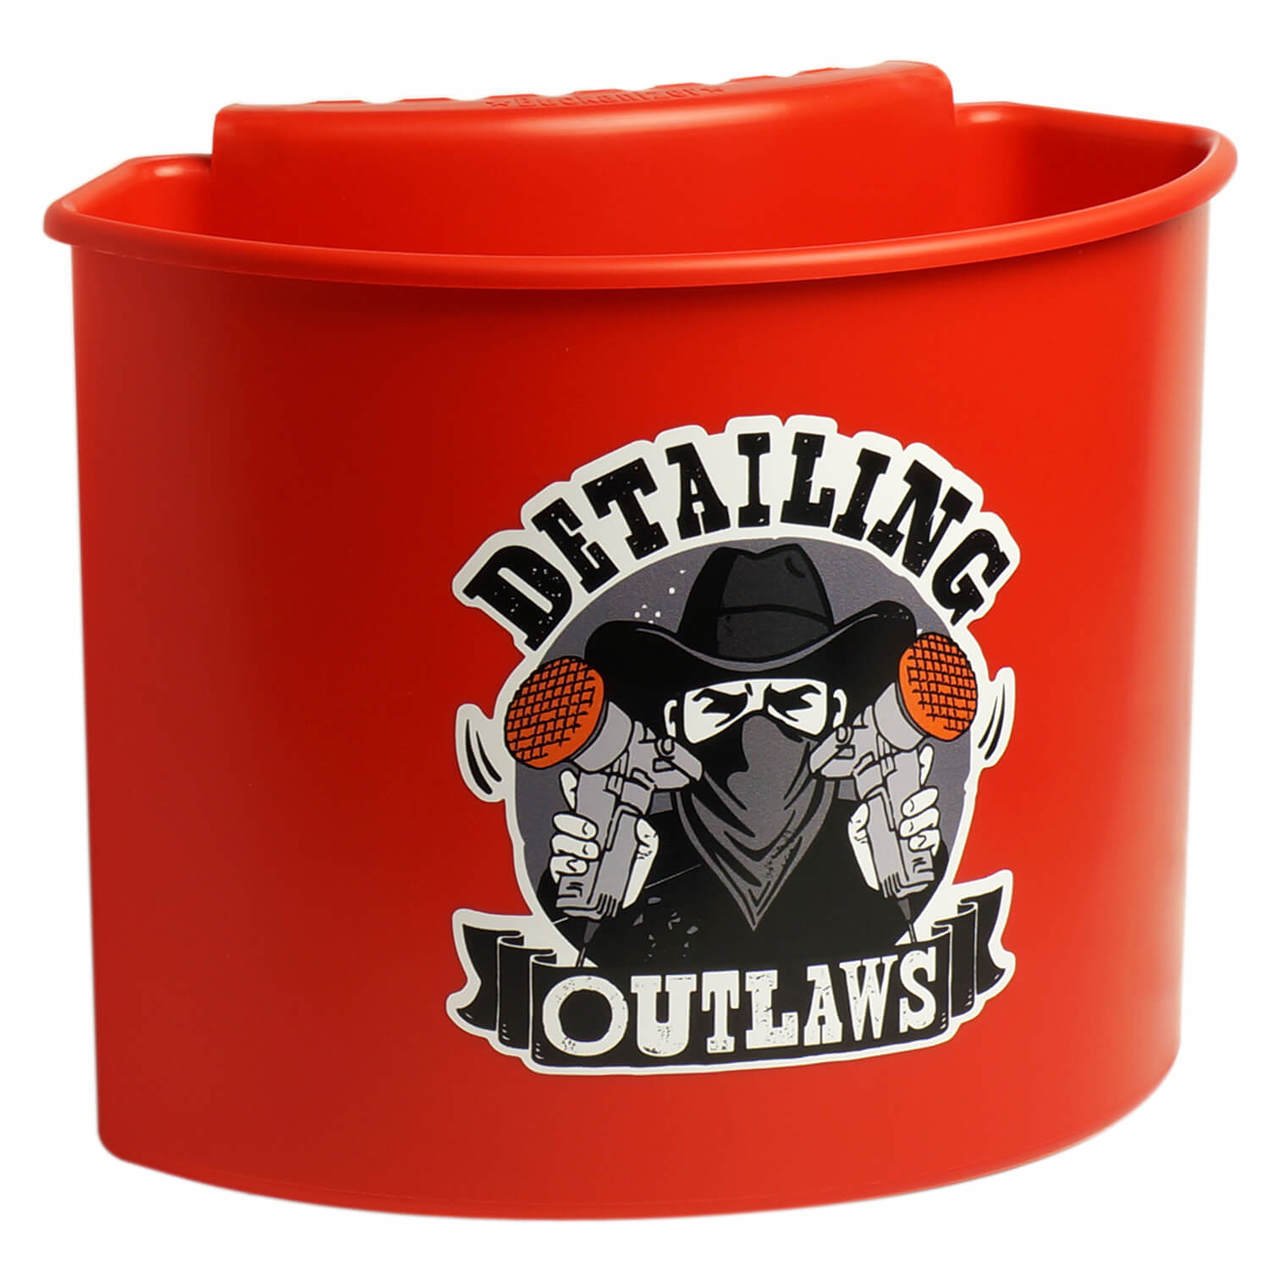 Detailing Outlaws Buckanizer - Red - Prime Finish Car Care